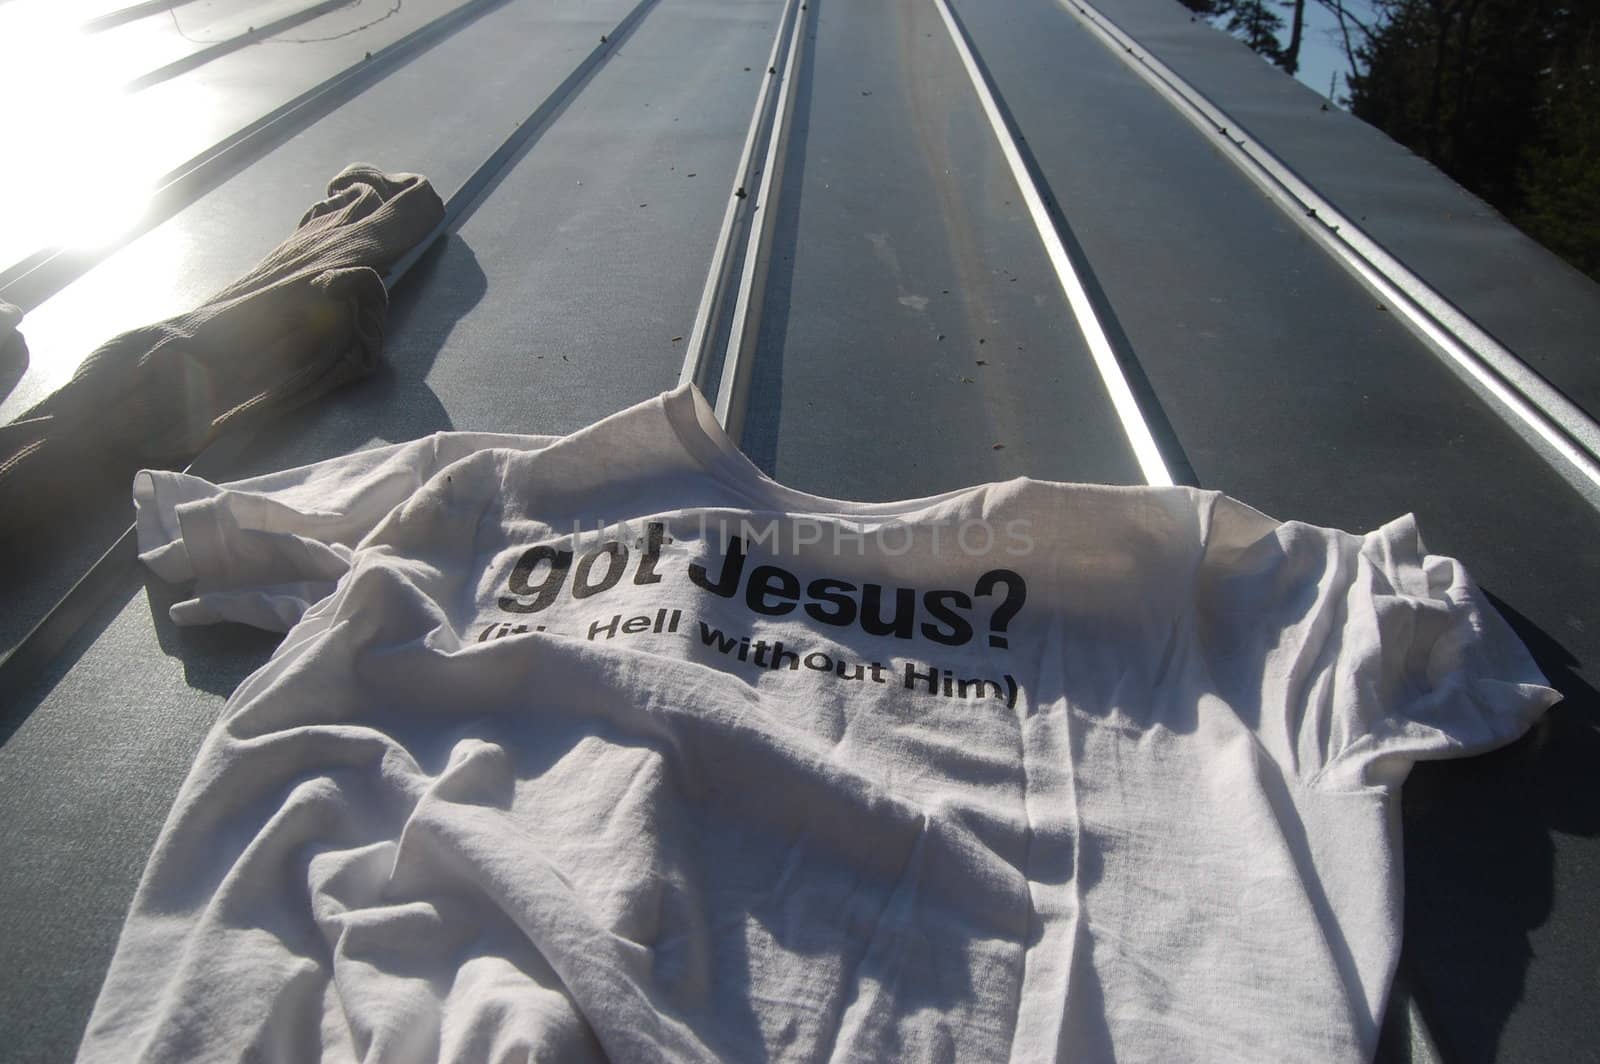 This t-shirt was drying on top of an Appalachian Trail shelter in Tennessee.







This t-shirt was drying in the sun one morning on top of an Appalachian Trail shelter in Tennessee.







Thi